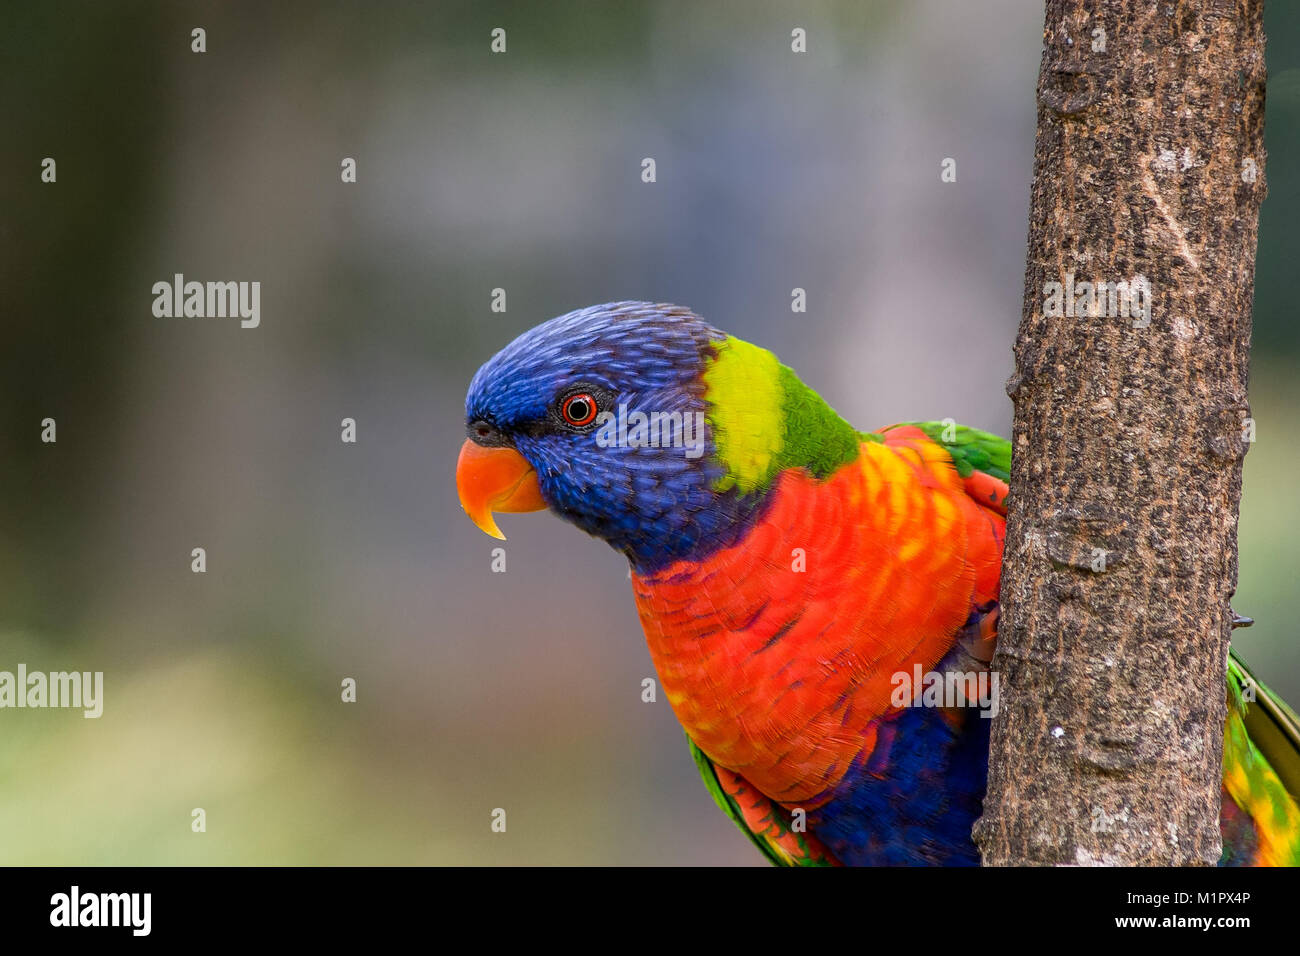 Portrait of a rainbow lorikeet clinging to the side of a tree as it looks at something of interest Stock Photo